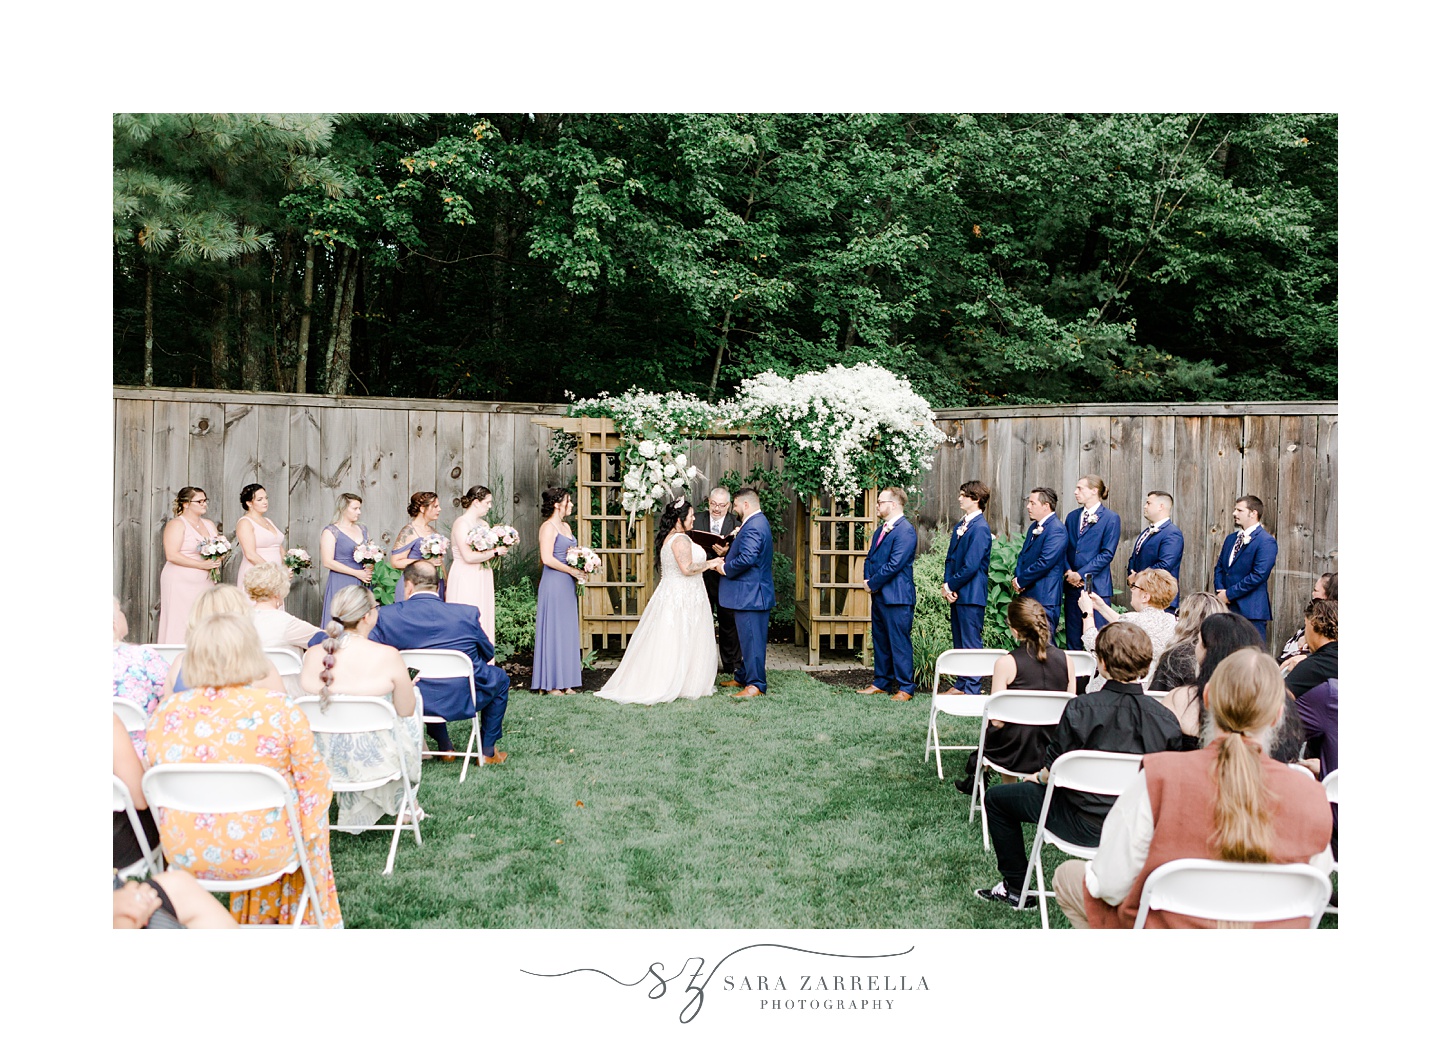 newlyweds exchange vows under wooden arbor with white flowers during Blissful Meadows wedding ceremony